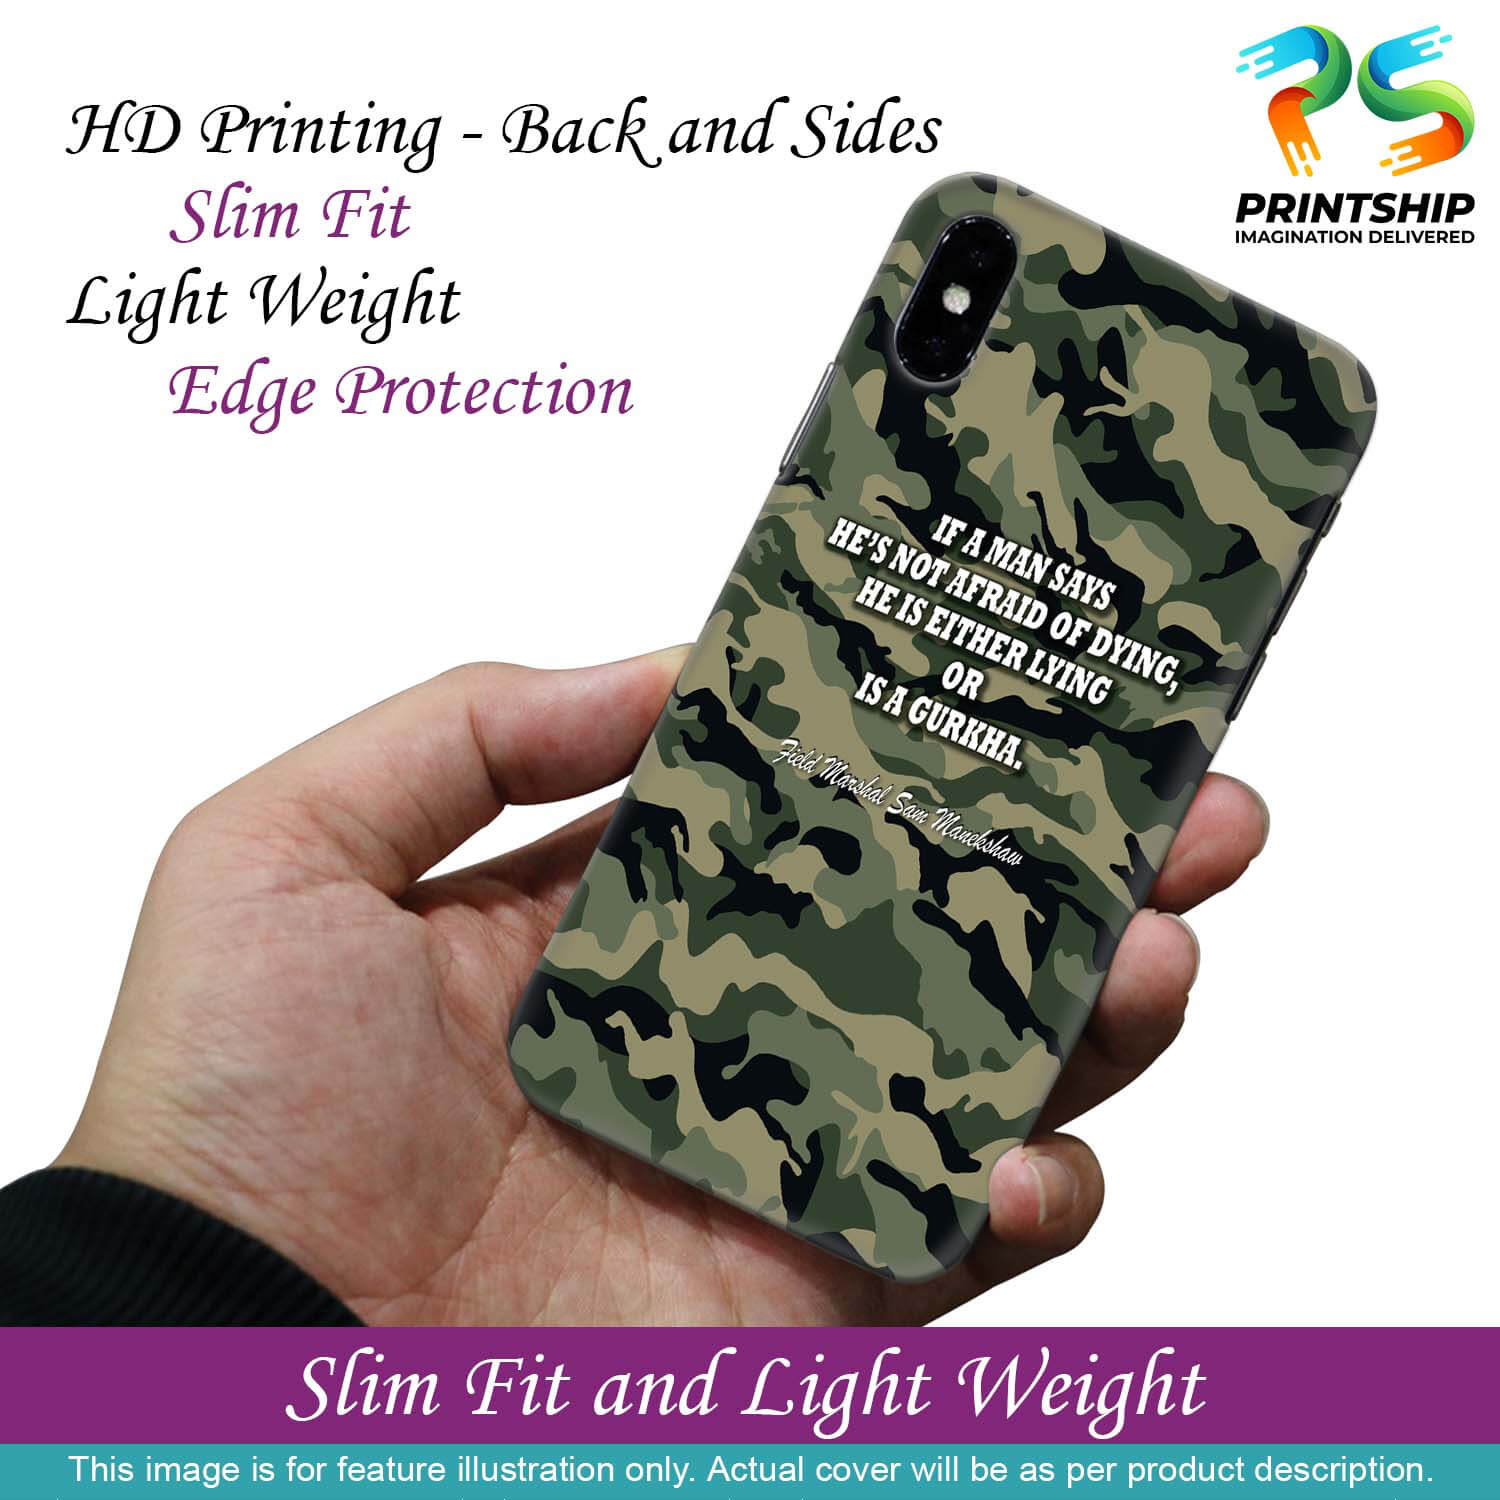 W0450-Indian Army Quote Back Cover for Samsung Galaxy J7 Pro